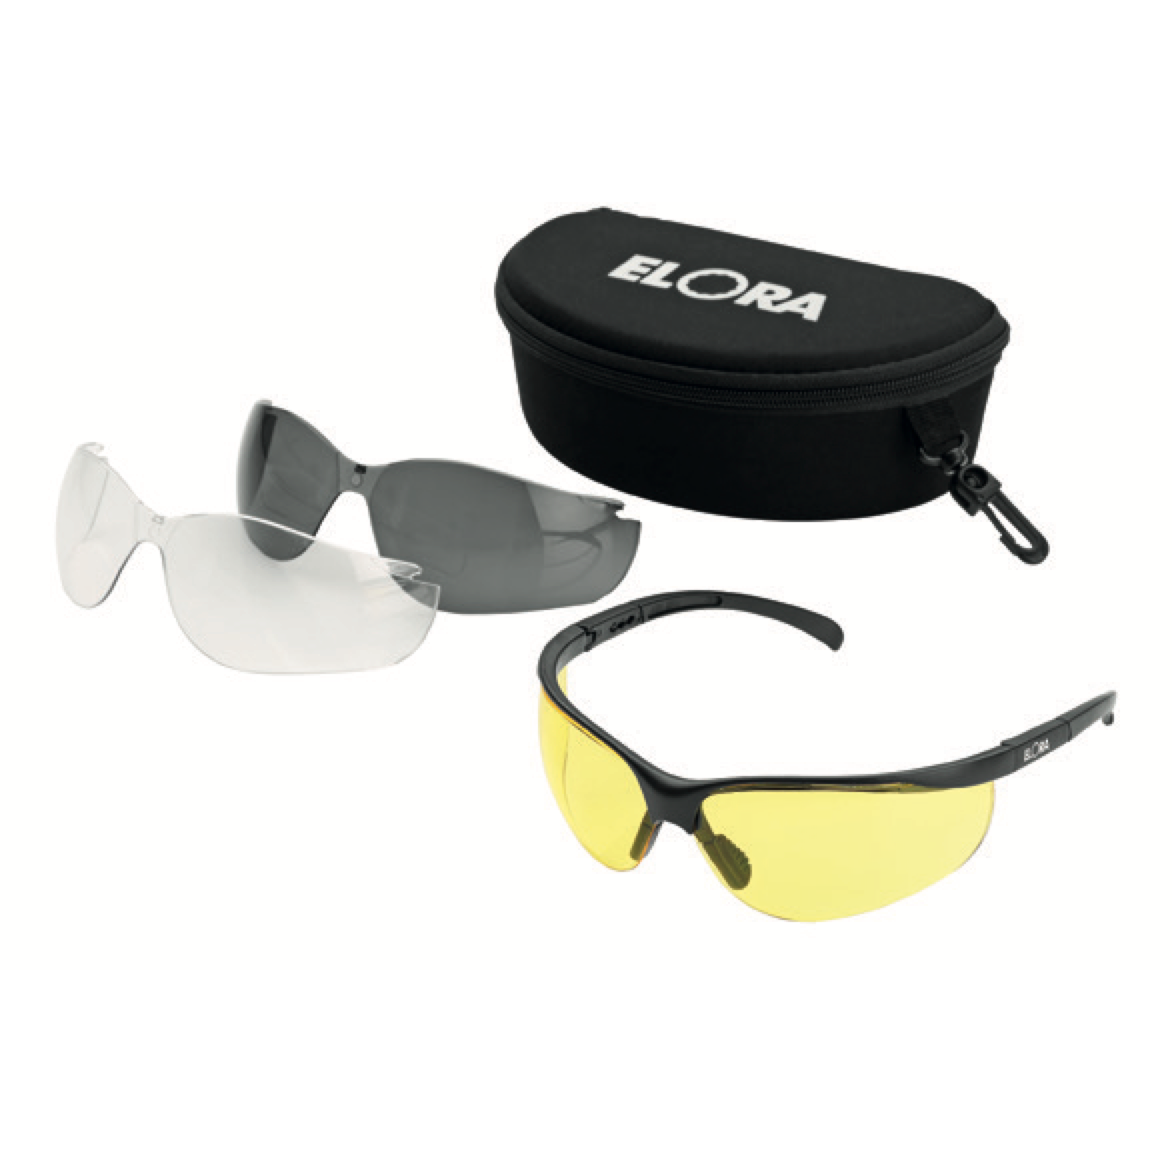 ELORA 887 Safety Goggles 3 In1 (ELORA Tools) - Premium Goggles from ELORA - Shop now at Yew Aik.